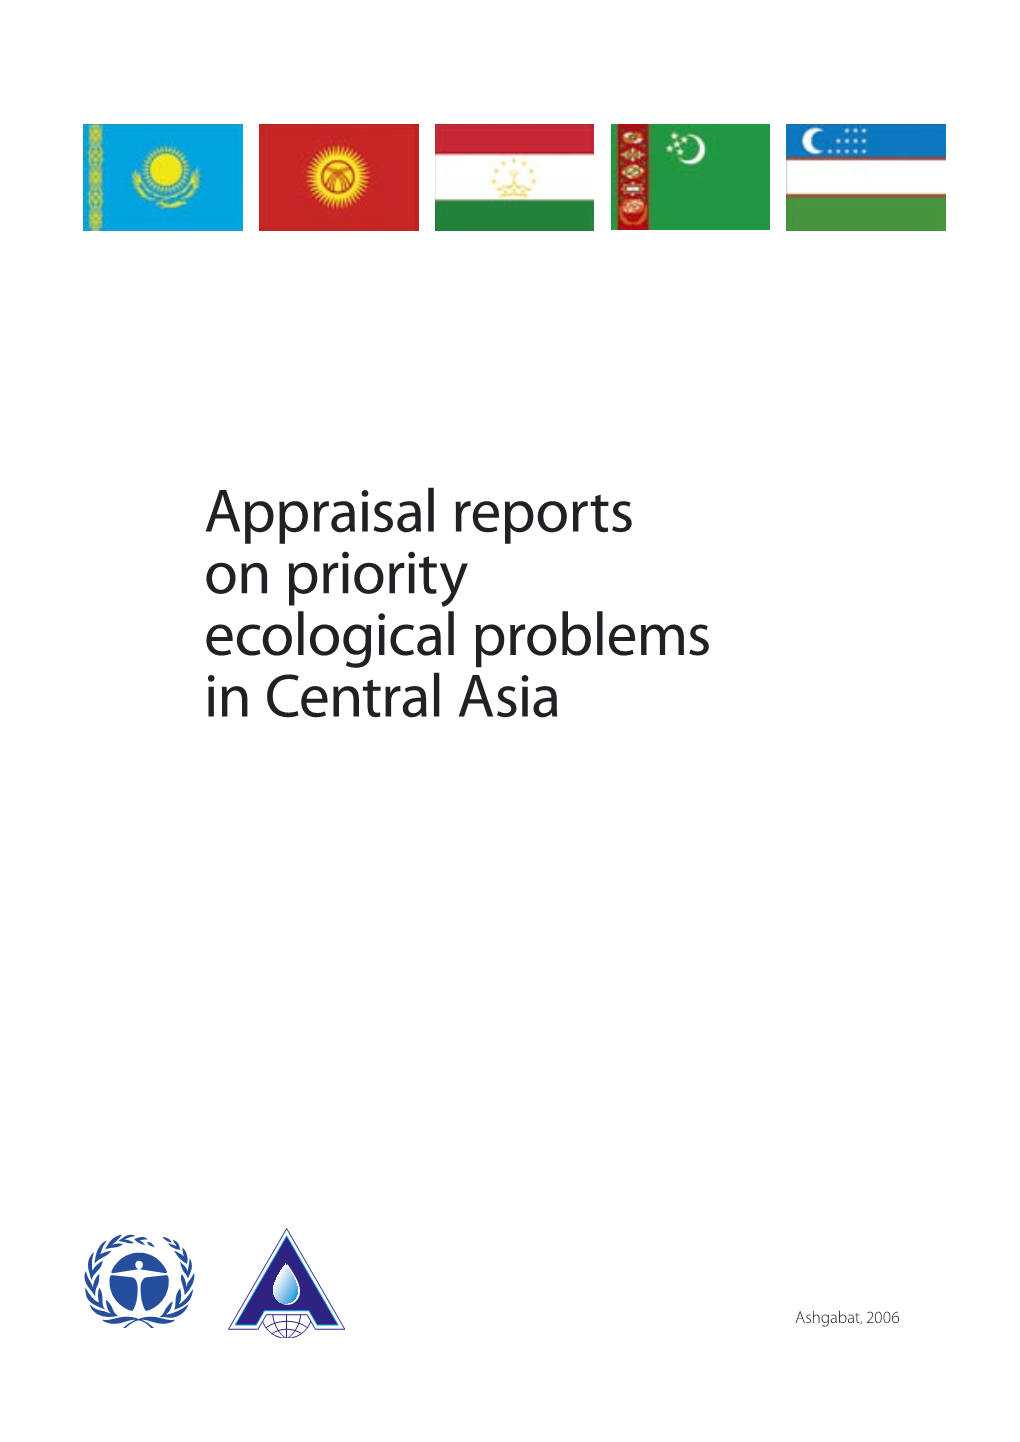 Appraisal Reports on Priority Ecological Problems in Central Asia